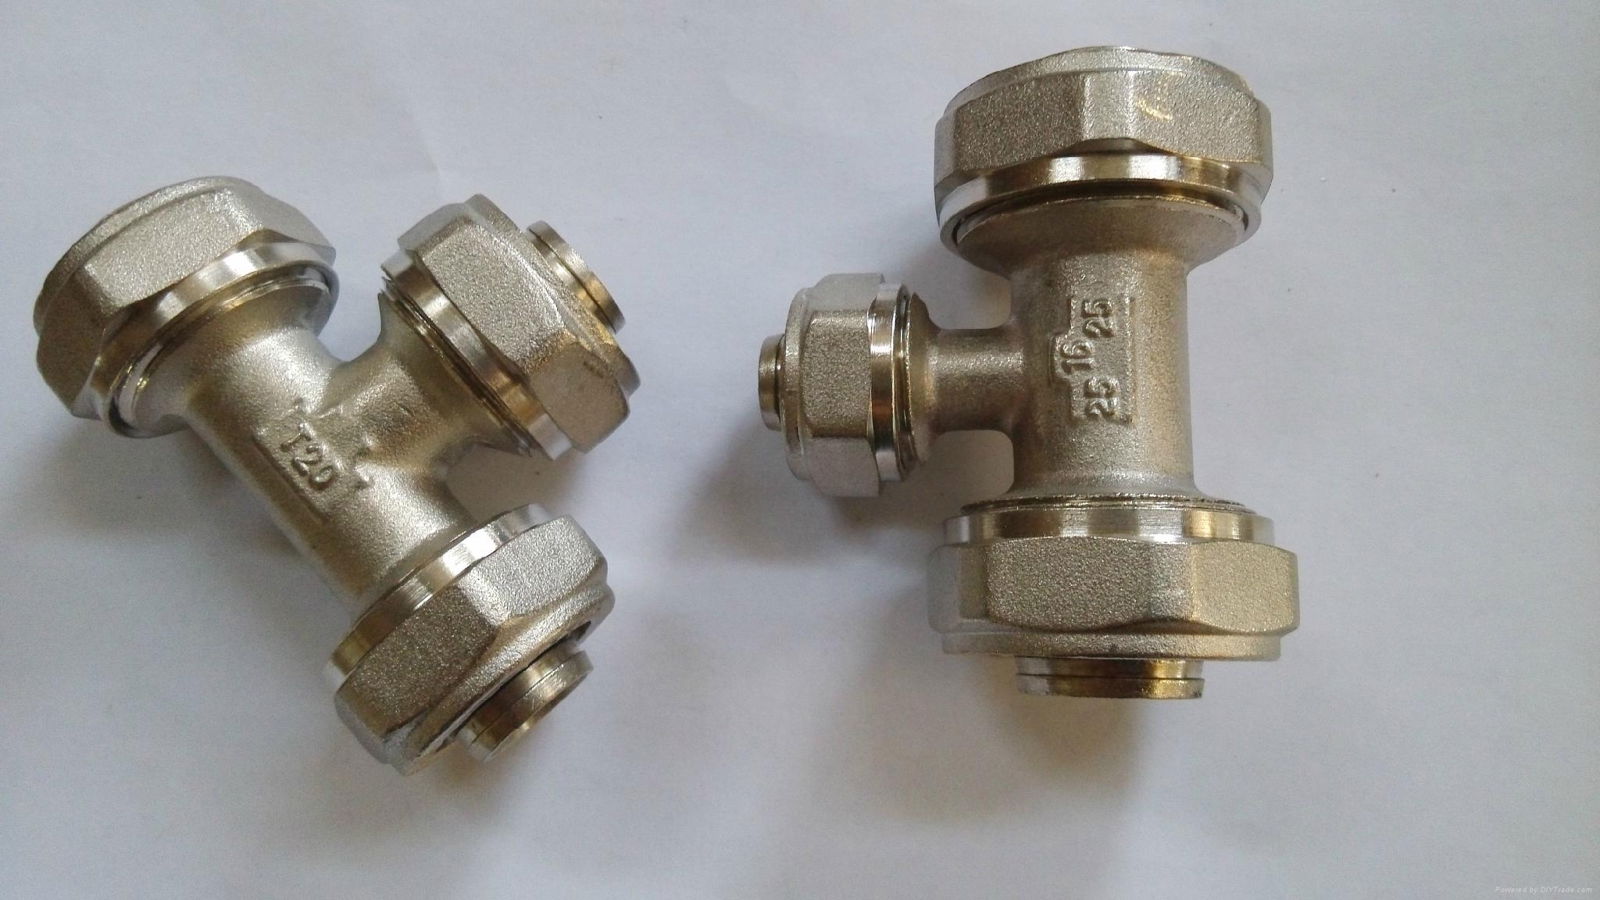 compression fitting tees for pex-al pipes 2